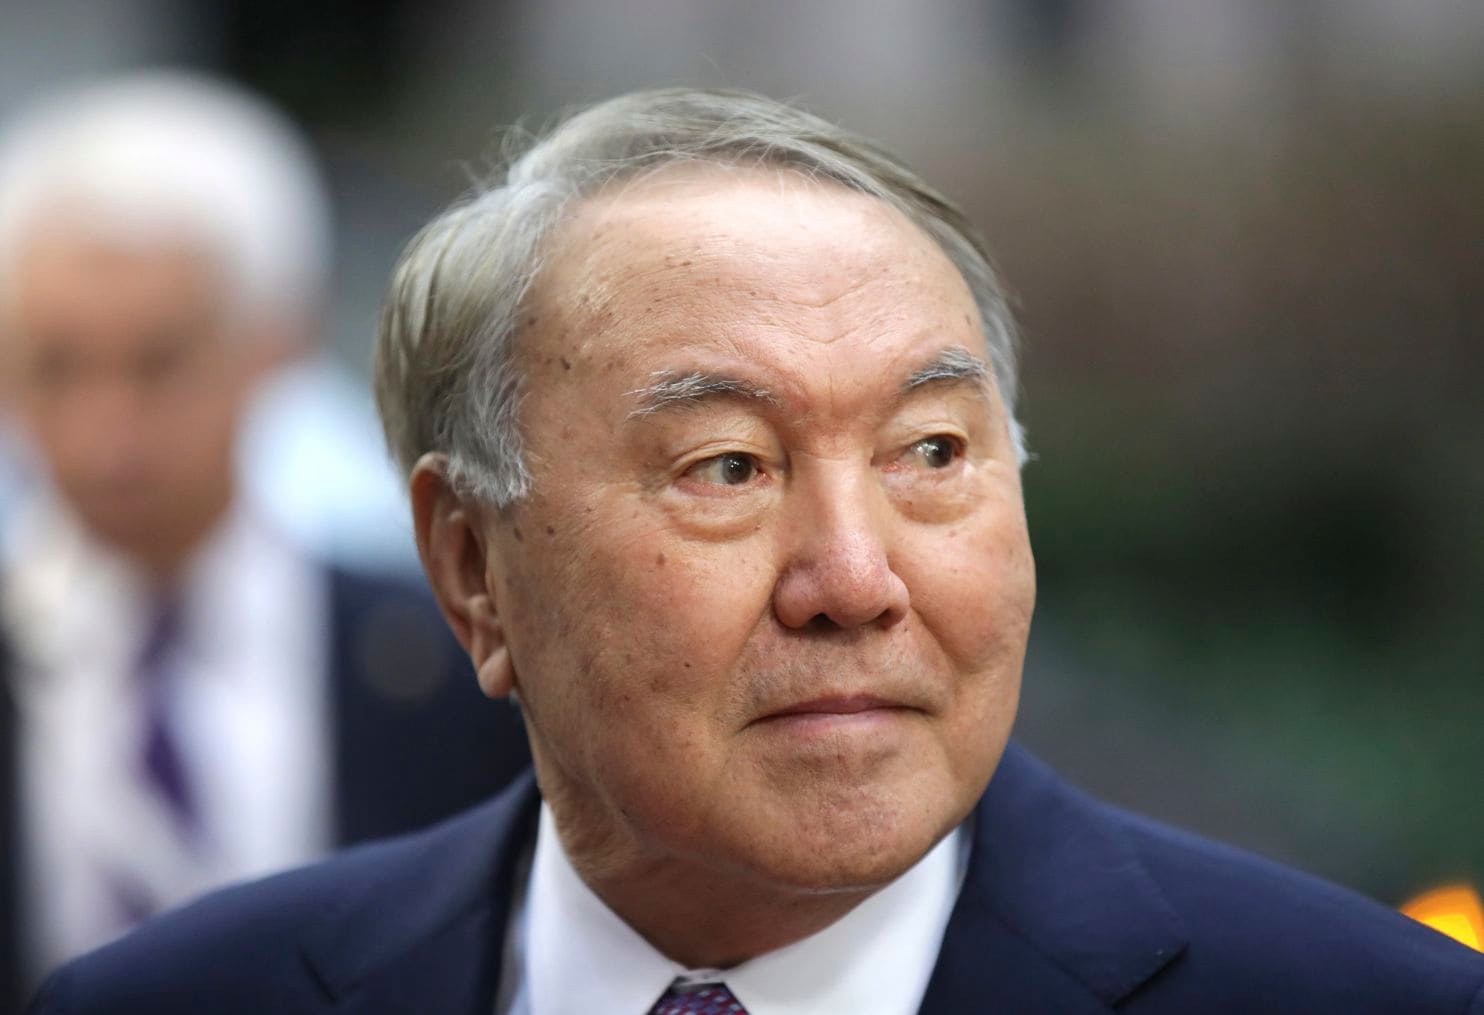 Kazakhstan President Nazarbayev to step down after nearly 30 years in power